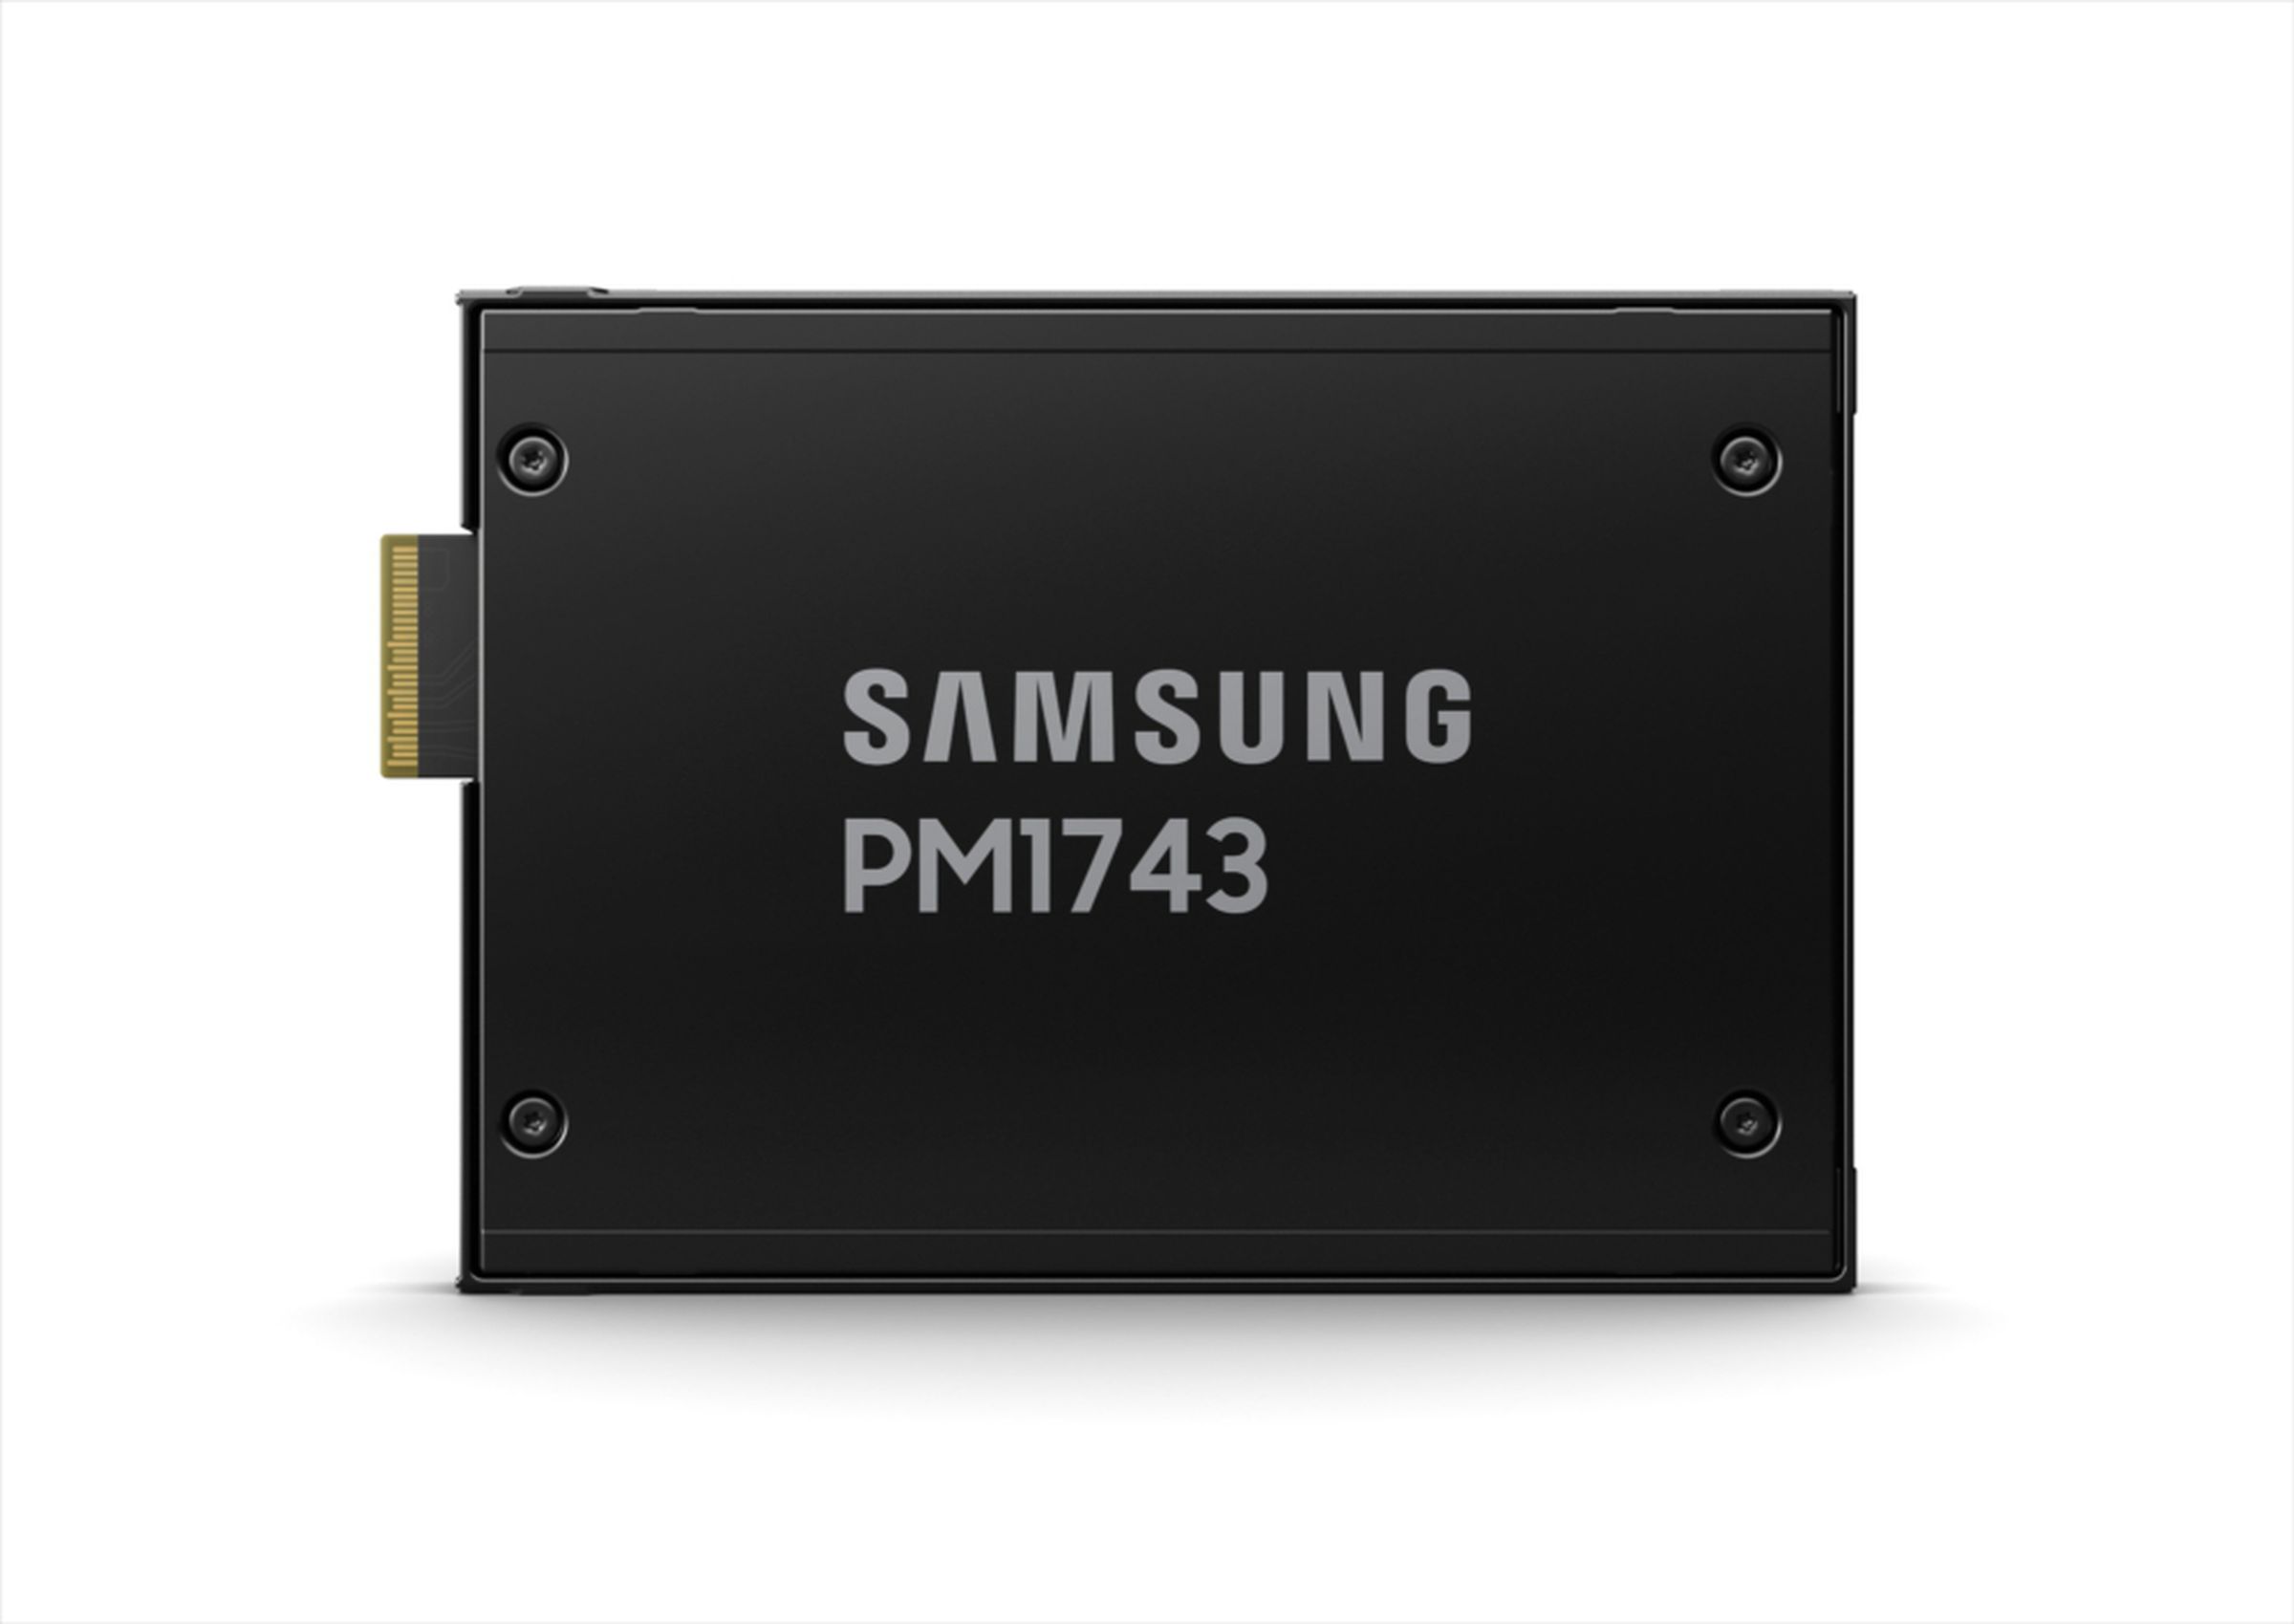 Samsung’s targeting enterprise servers with the PCIe 5.0 PM1743 SSD.